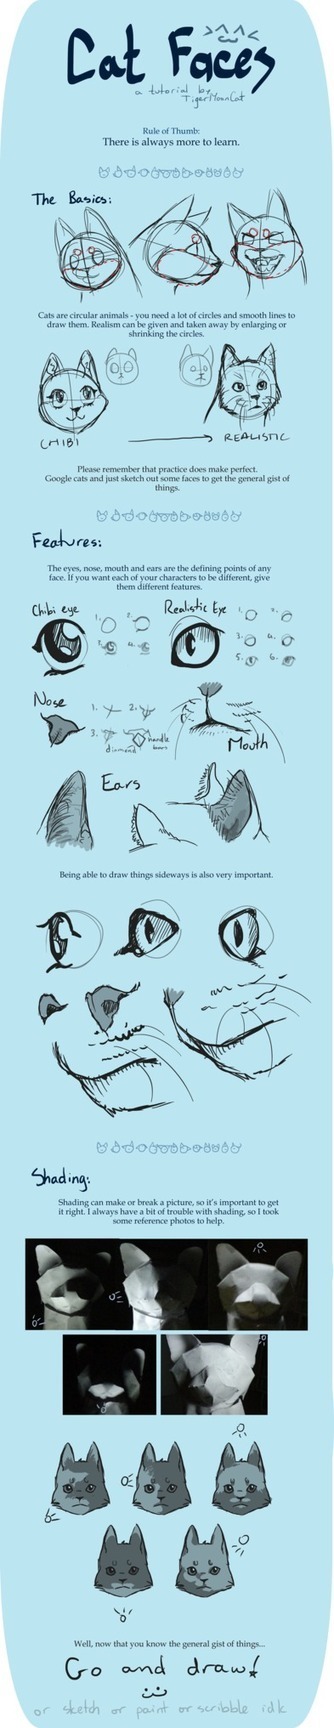 Cat Faces Drawing Reference Guide | Drawing References and Resources | Scoop.it